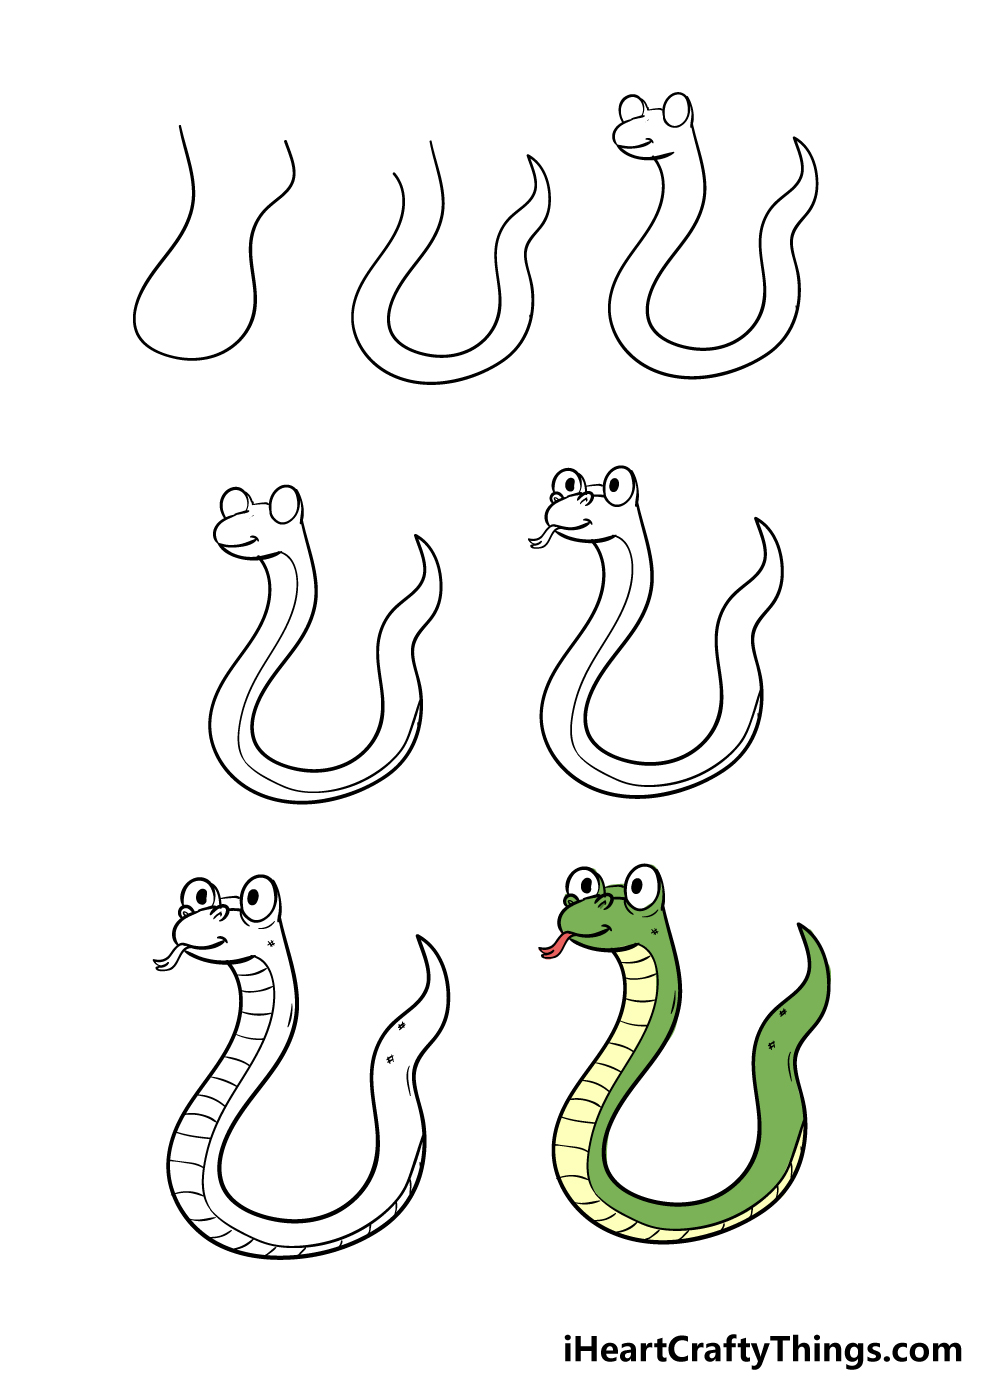 how to draw snake in 7 steps